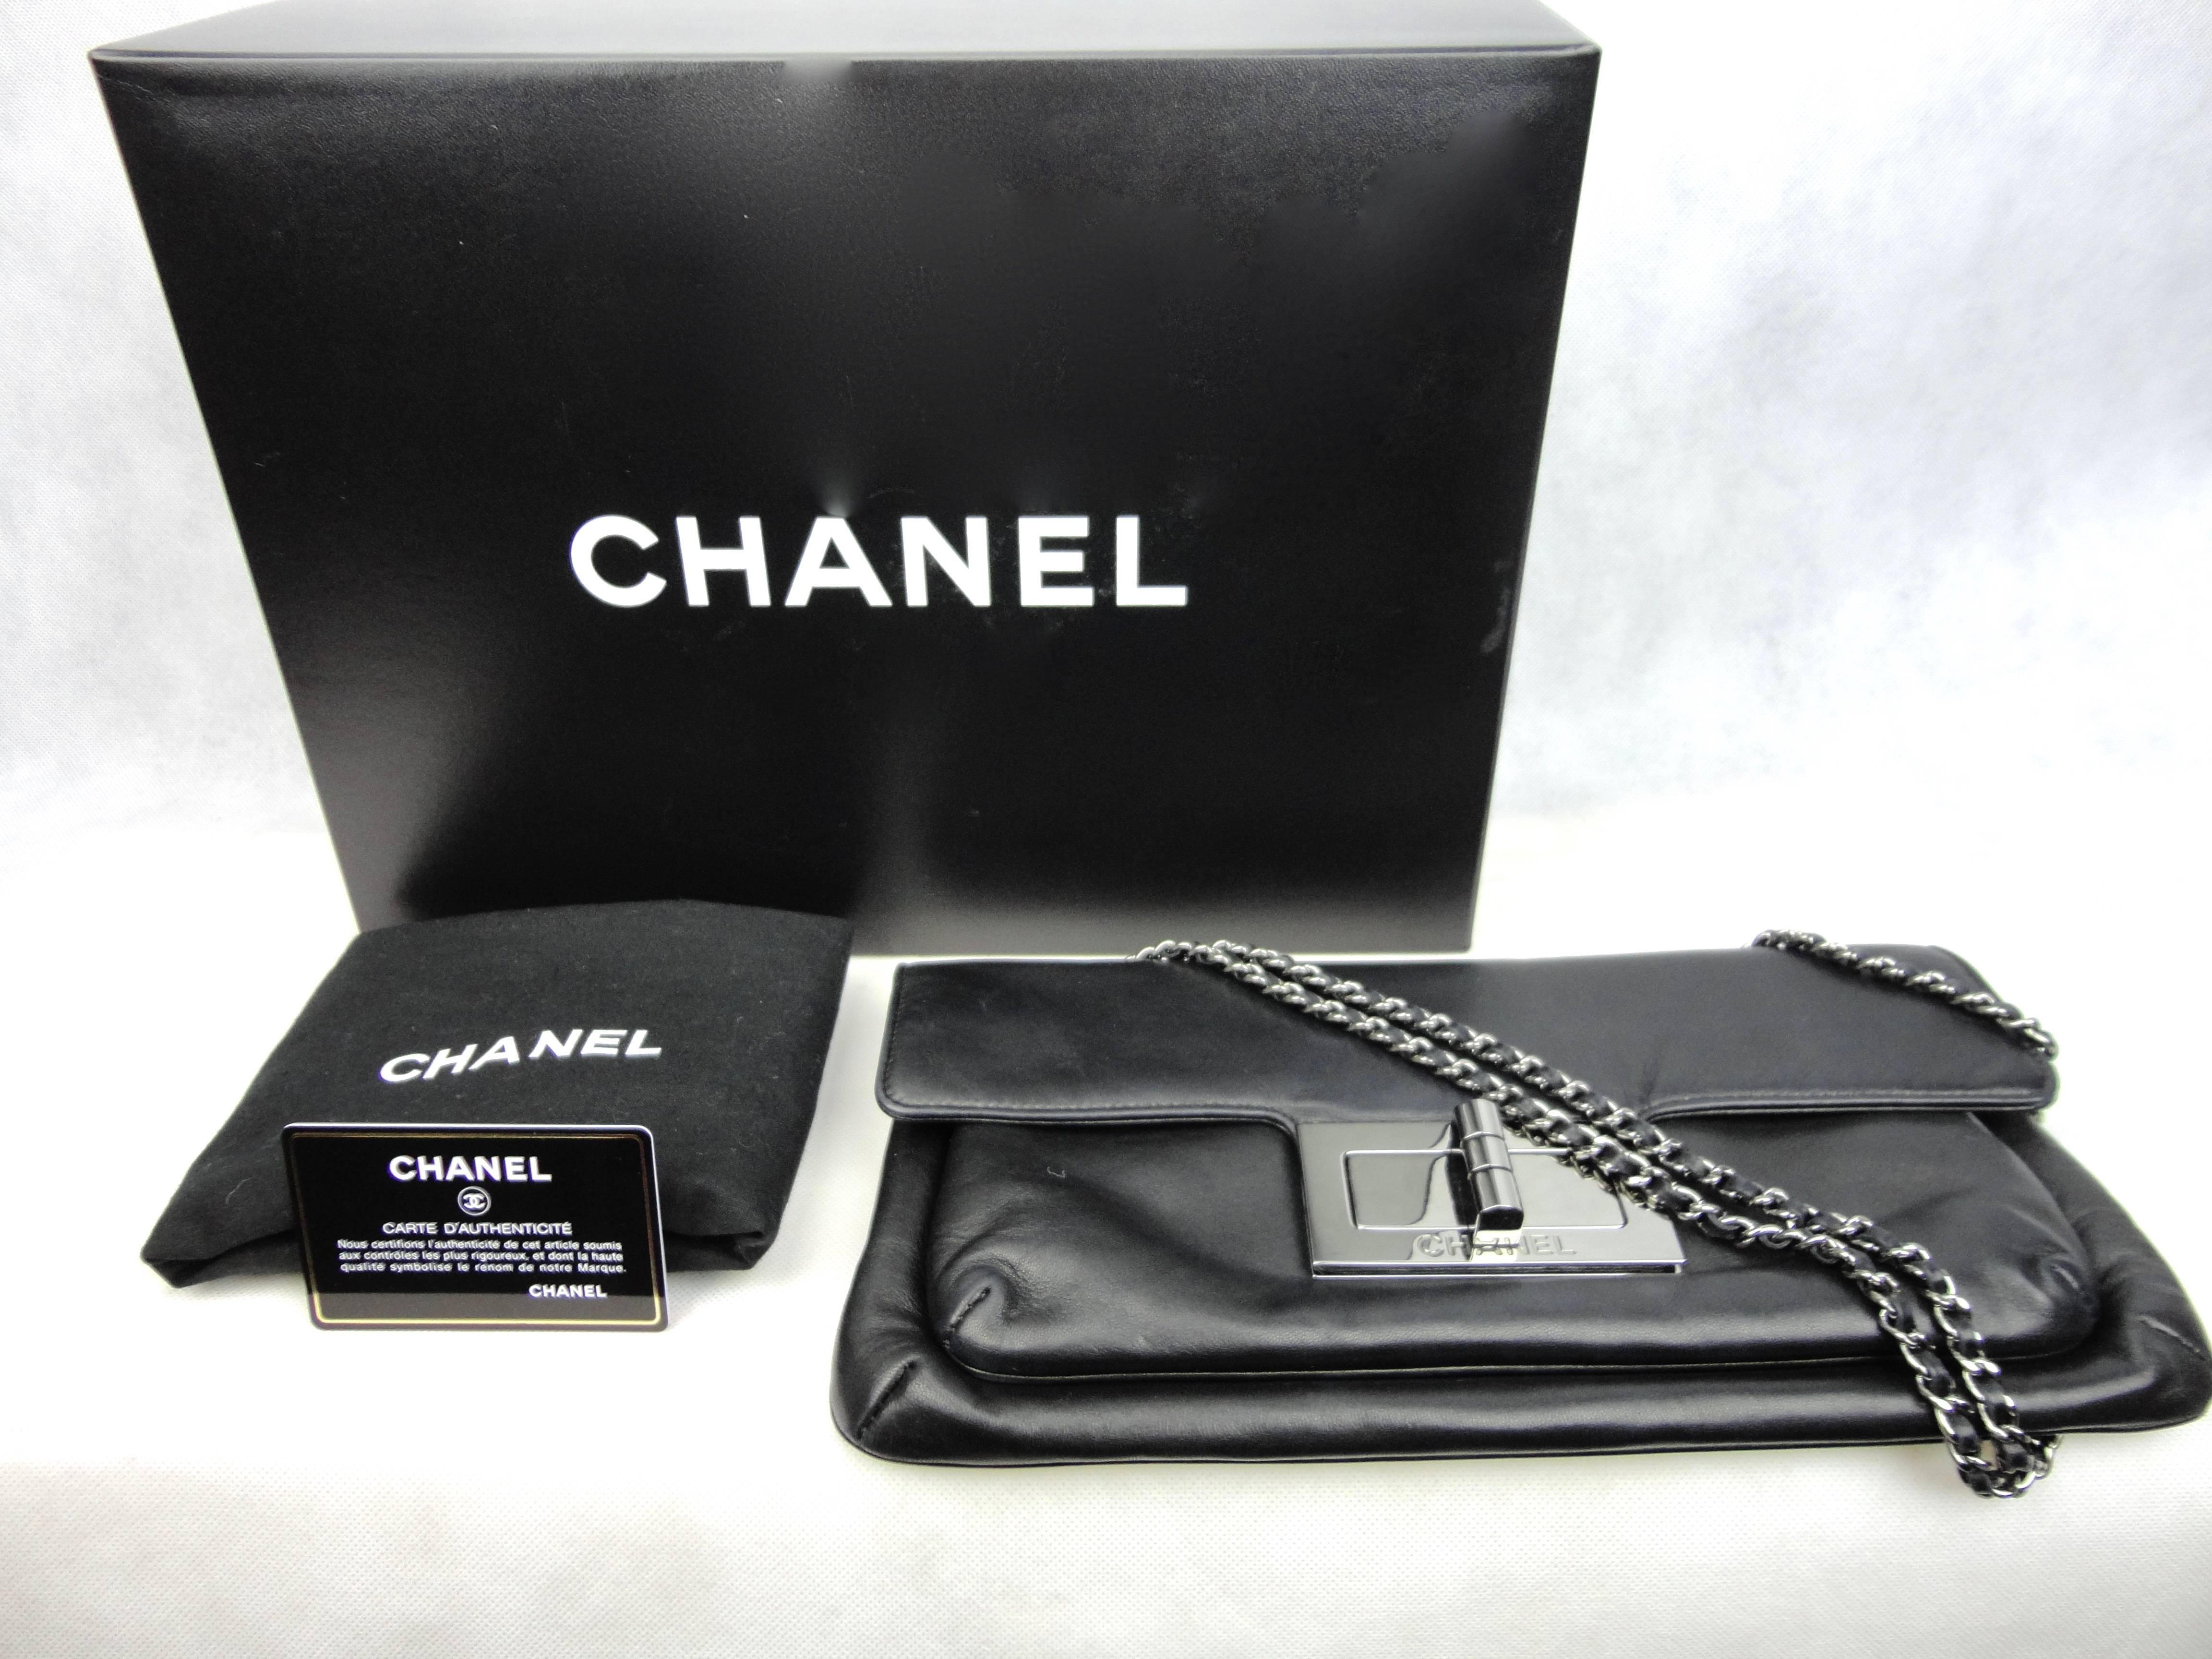 Chanel Reissue flap mini bag in black lambskin leather with gunmetal hardware details in excellent condition, only used once.
Sold full set with box, dustbag and authenticy card.

Height 16 cm x Width 30 cm x Depth 5 cm